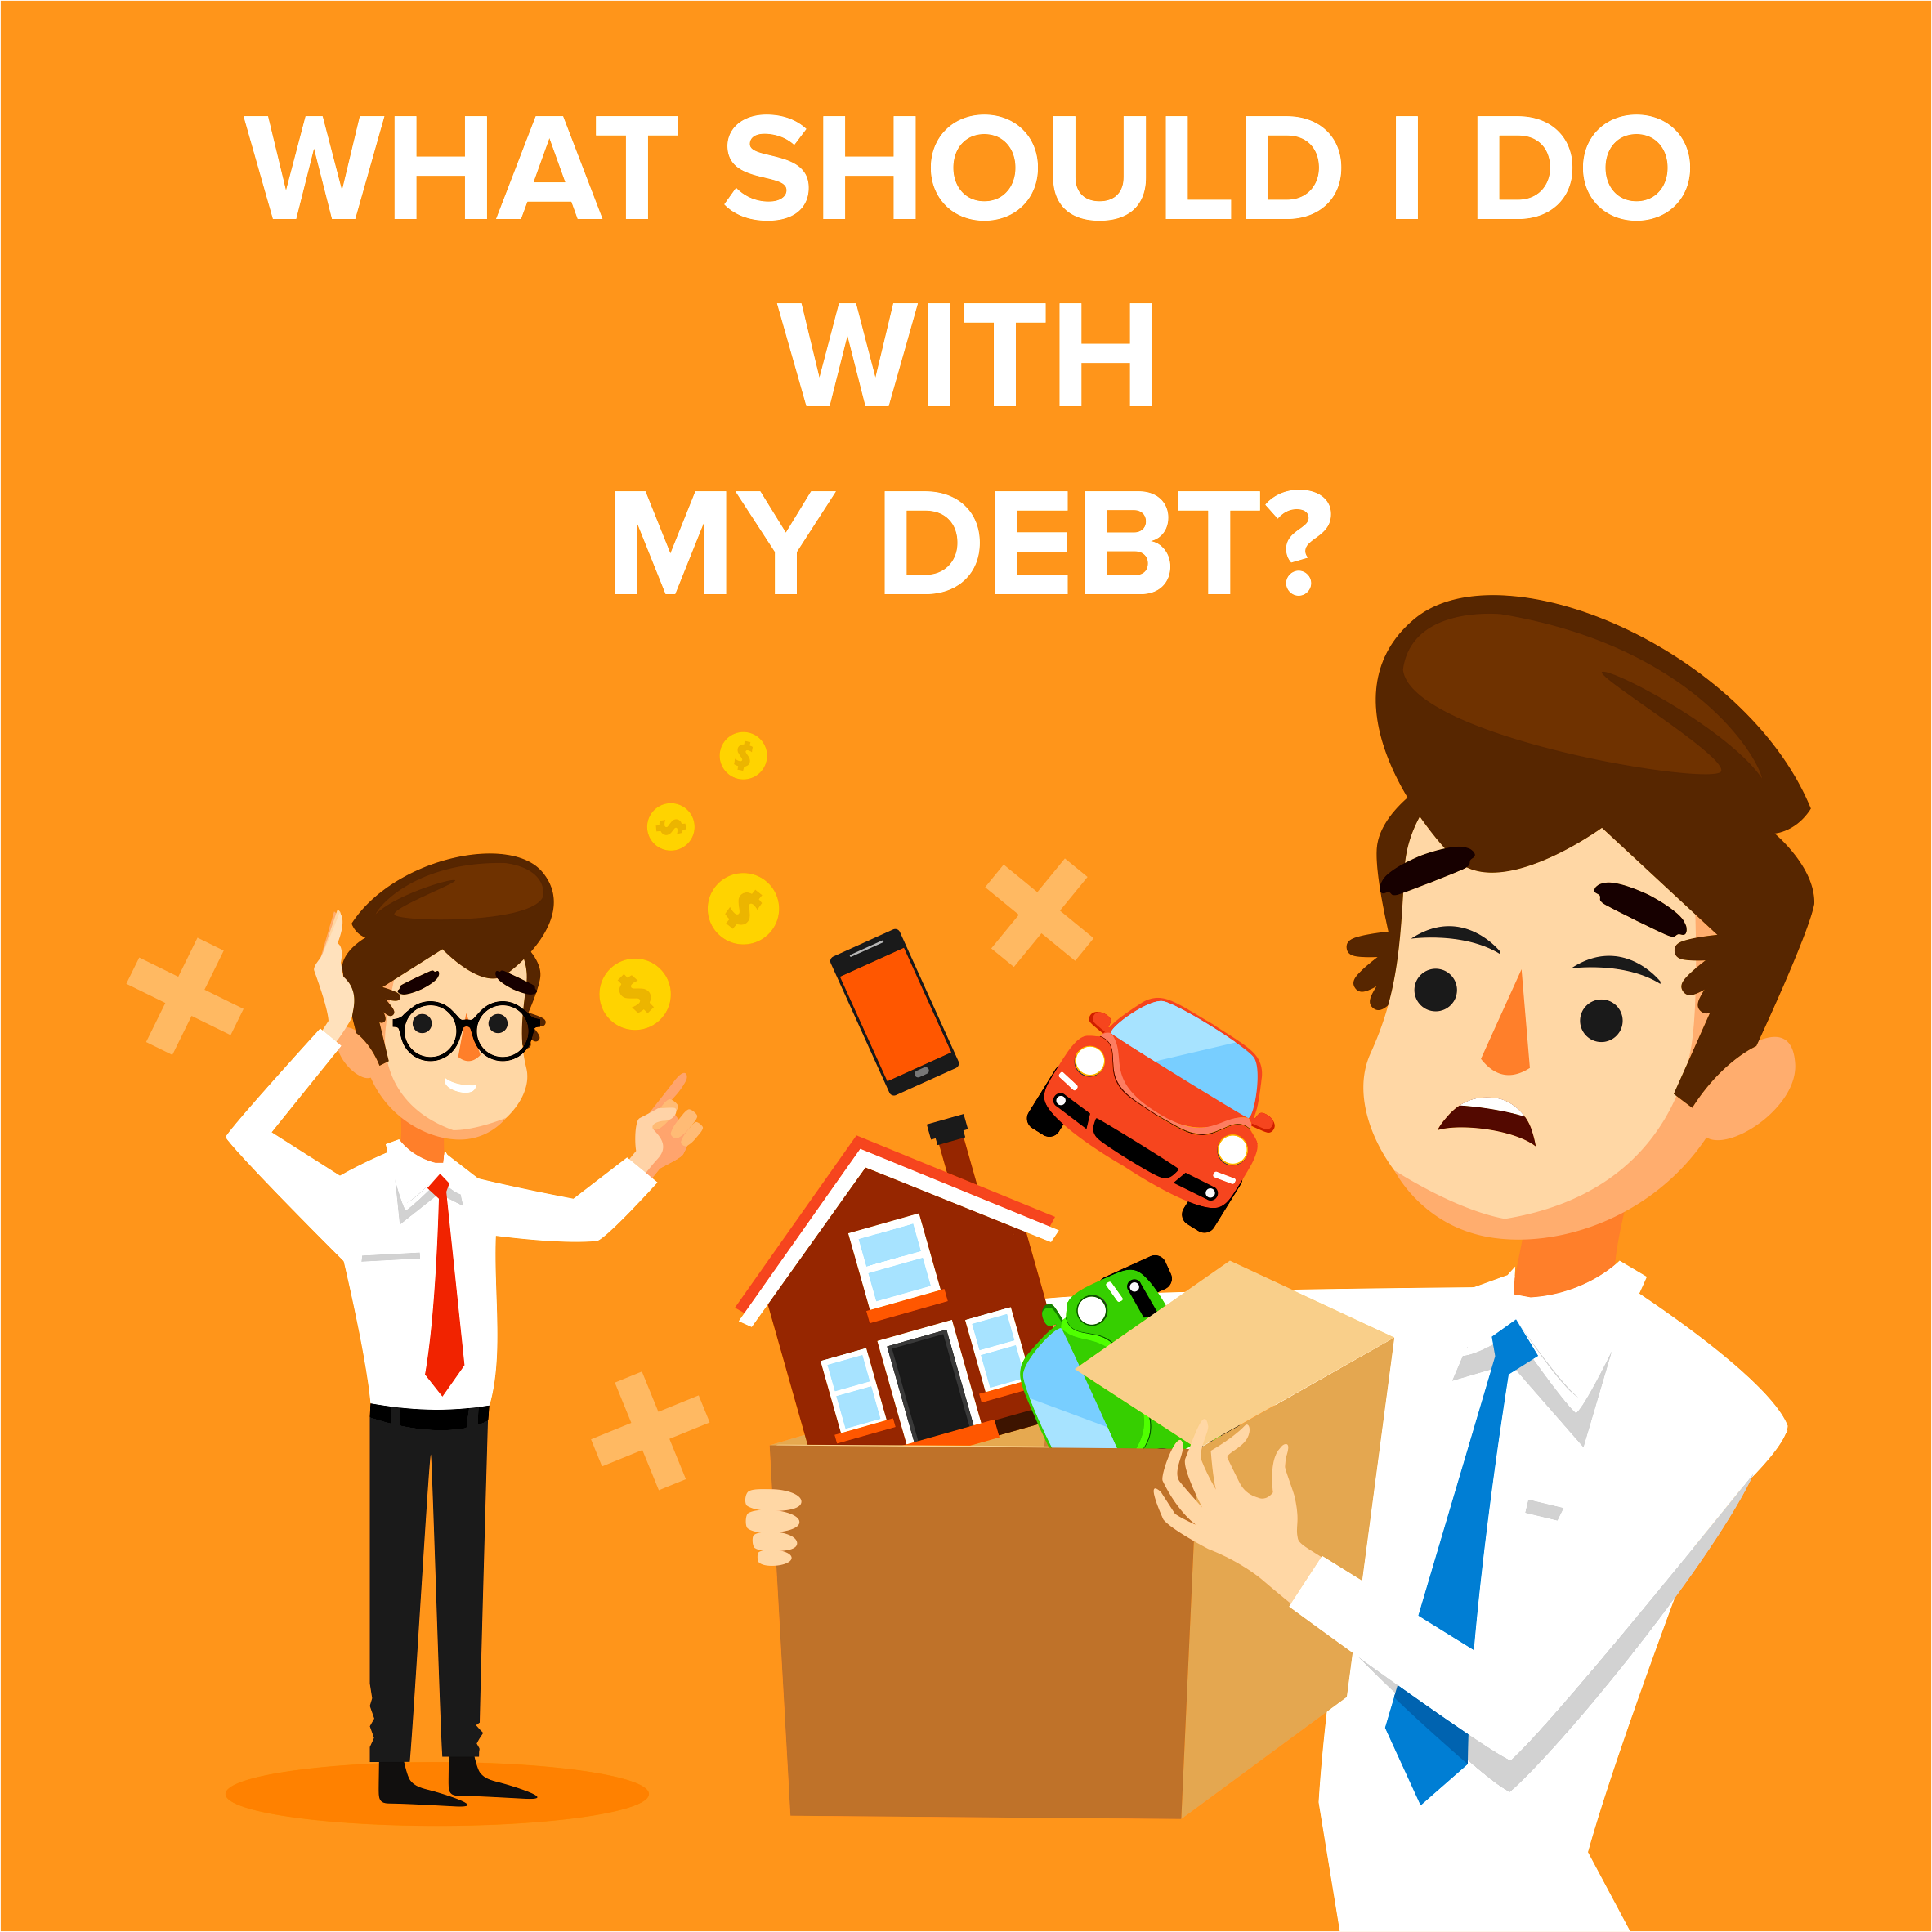 What Should I do With my Debt?